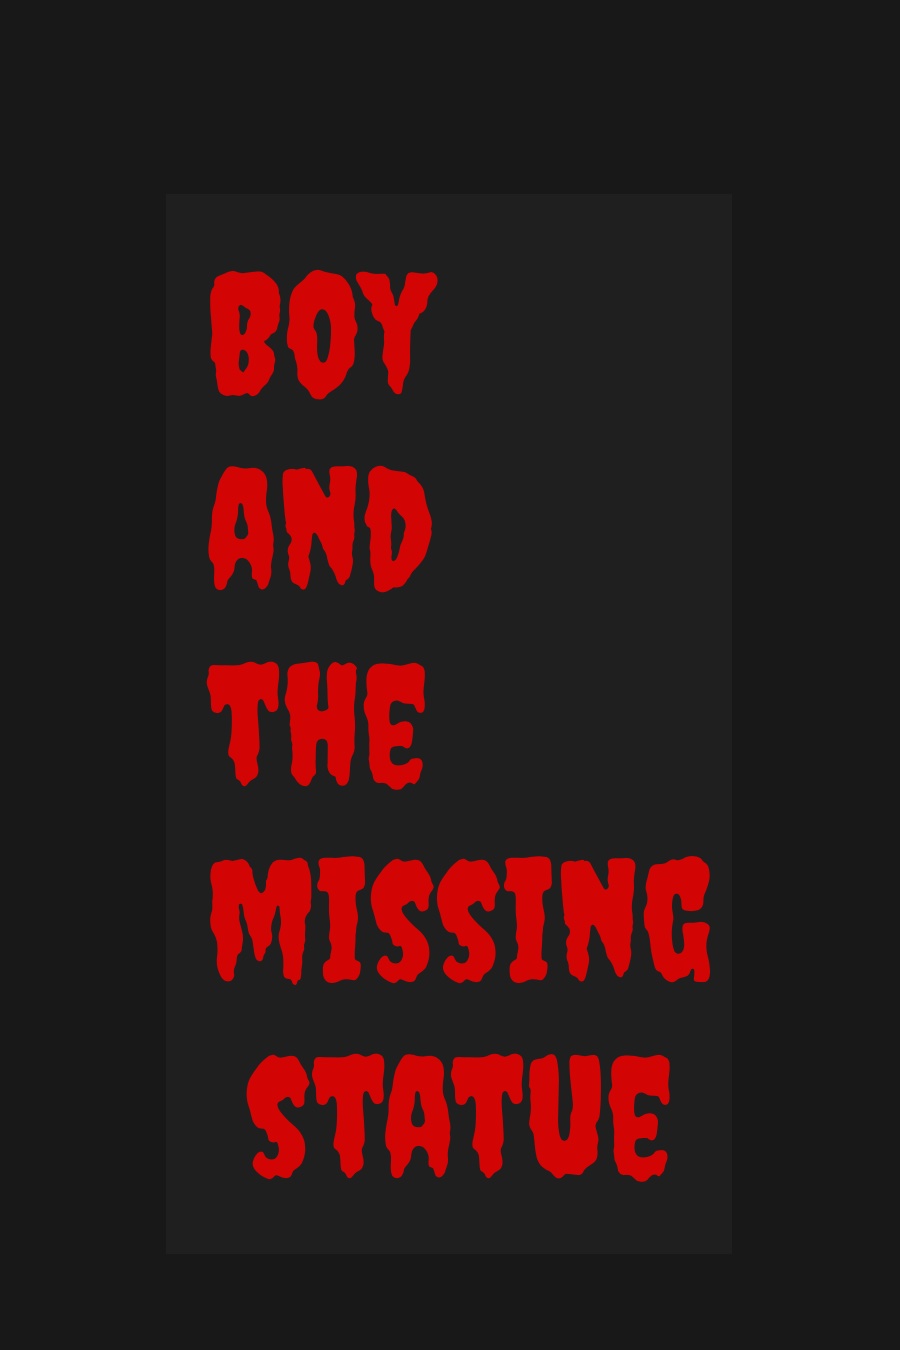 Boy and the Missing Statue by Sammy K